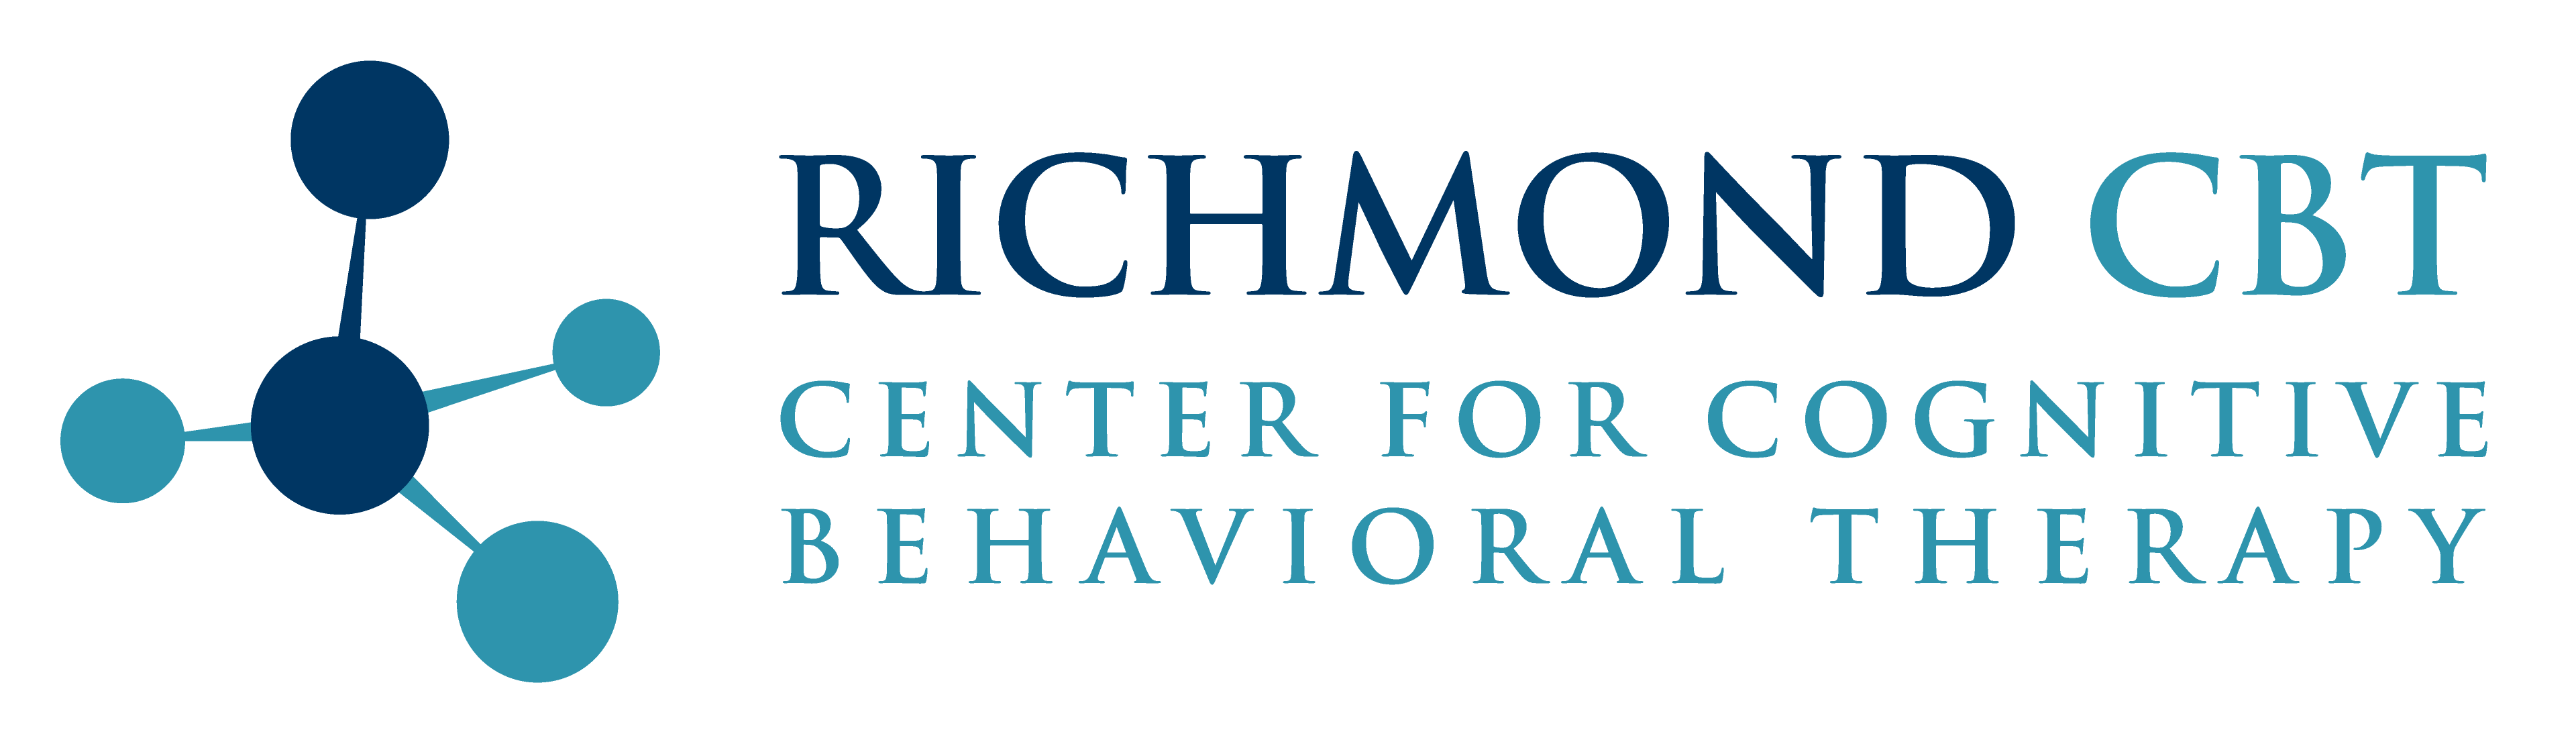 Richmond Center for Cognitive Behavioral Therapy